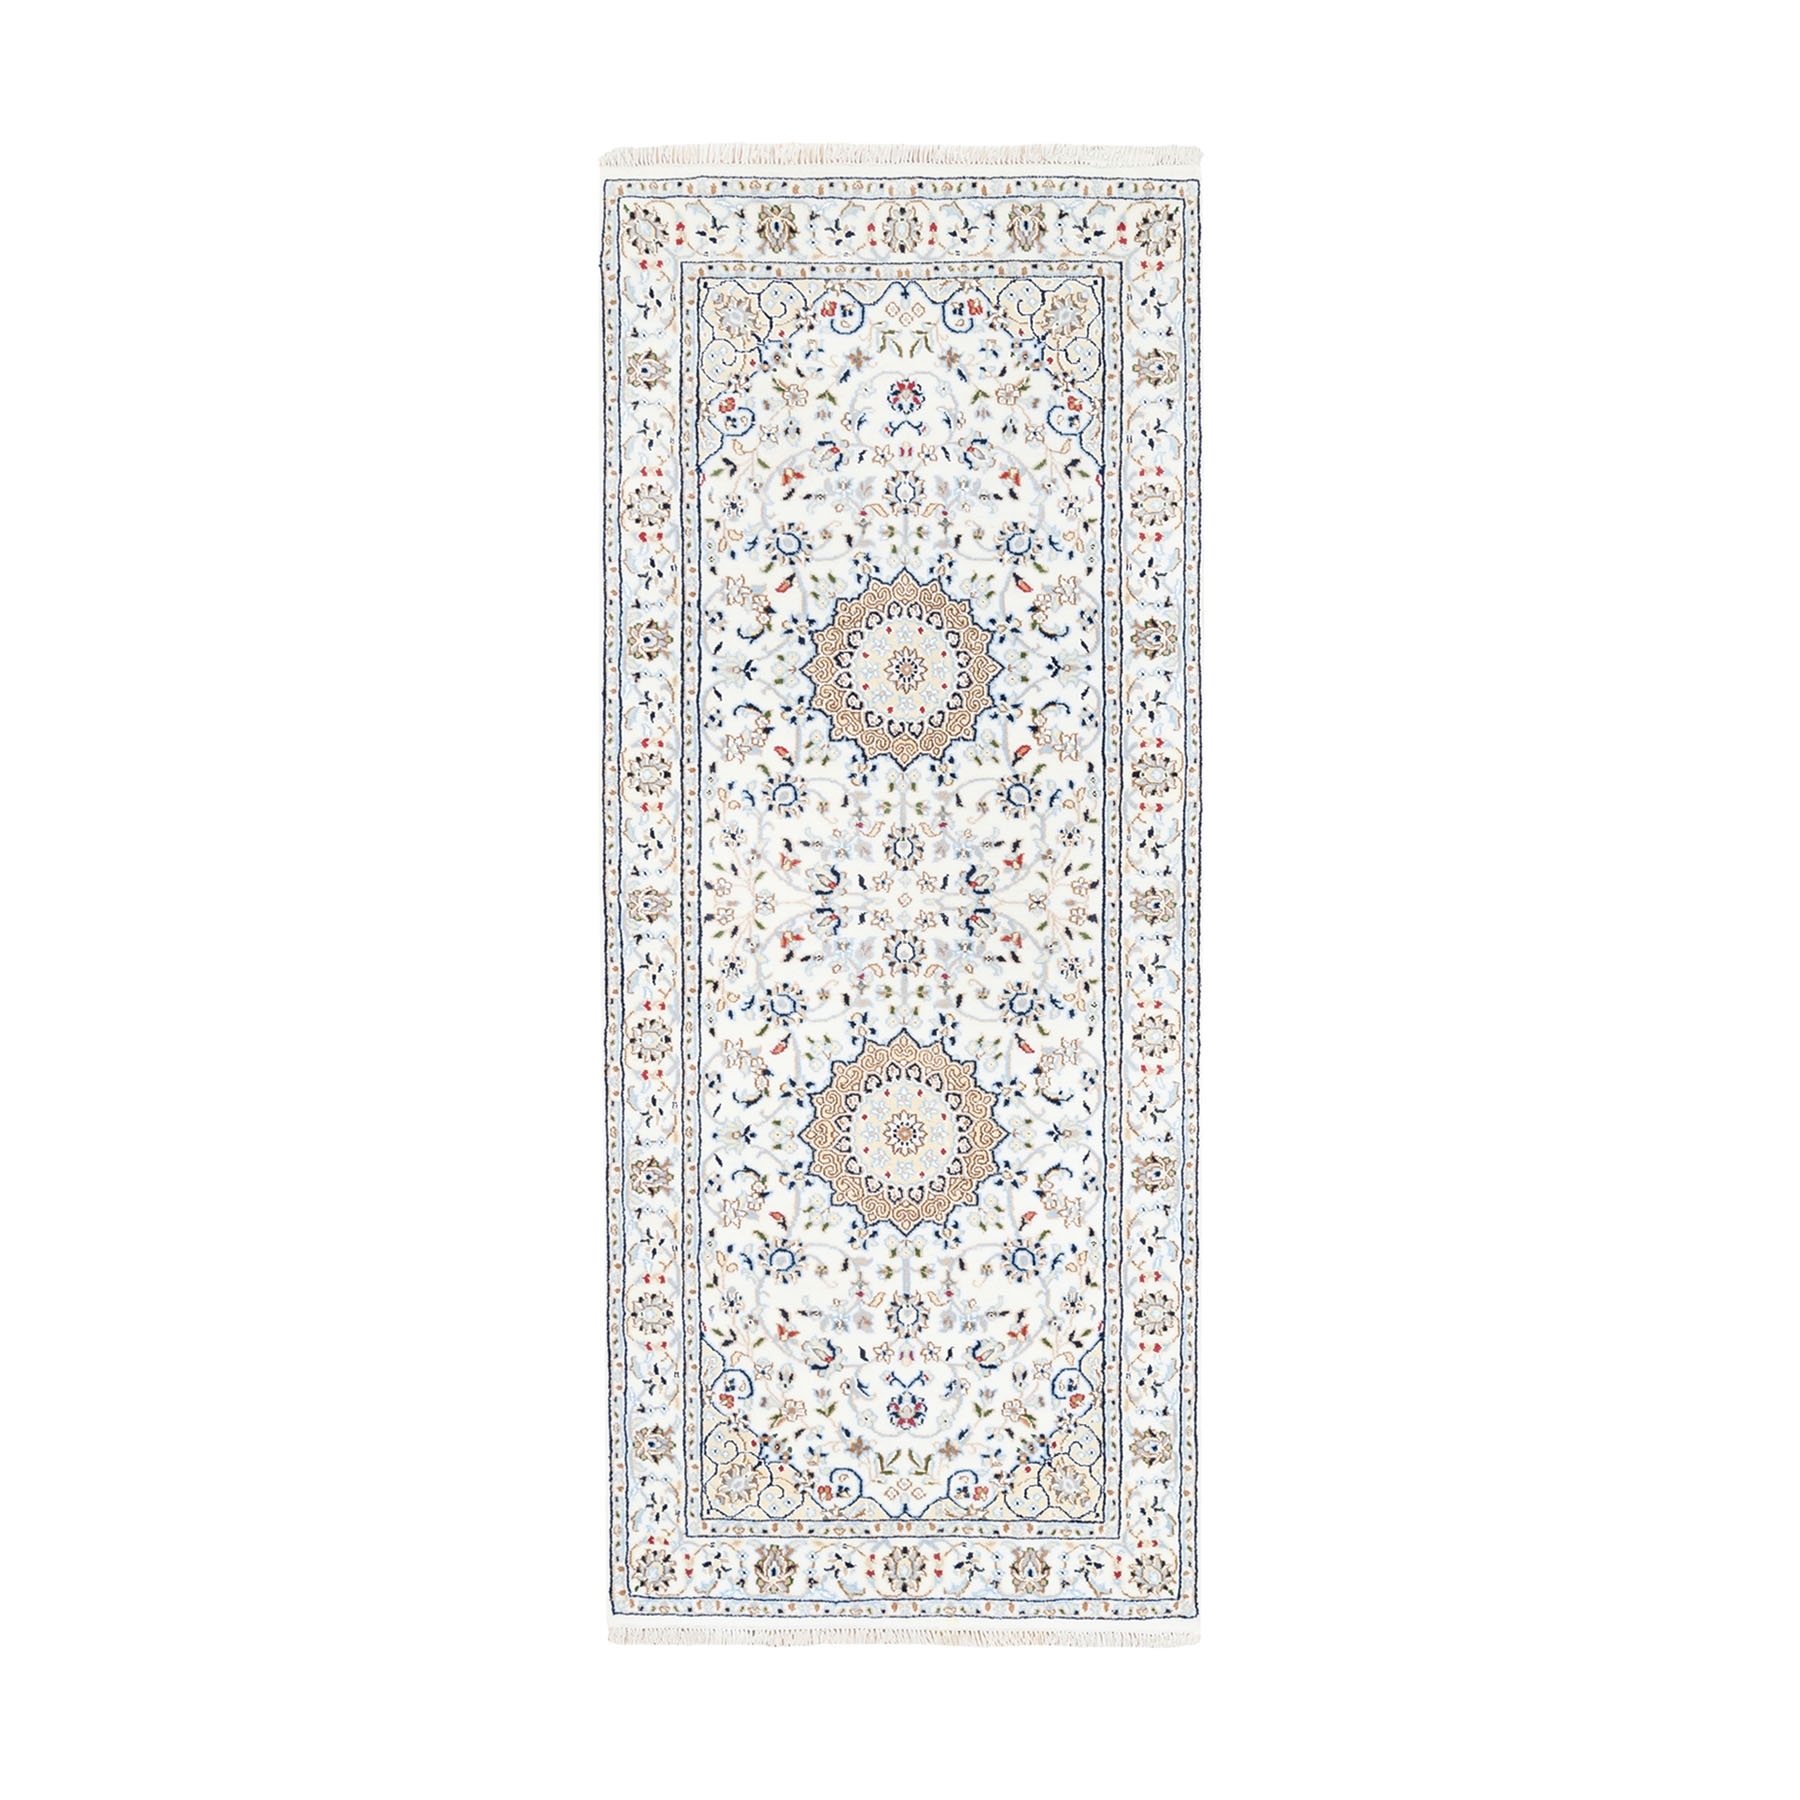 Pirniakan Collection Hand Knotted Ivory Rug No: 1125546